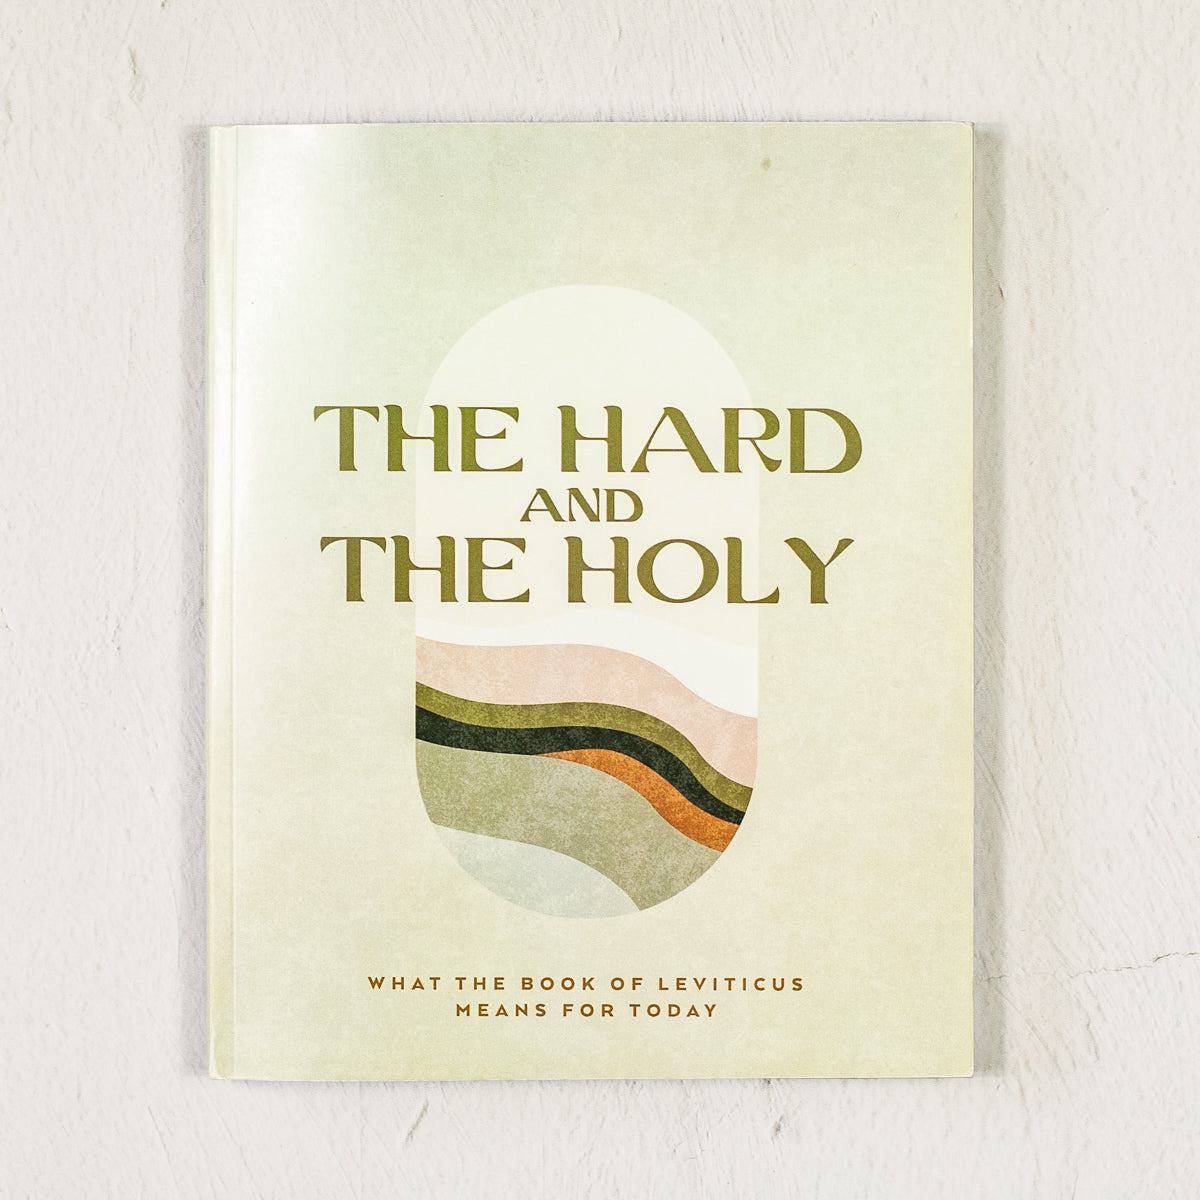 The Hard and the Holy: What the Book of Leviticus Means for Today